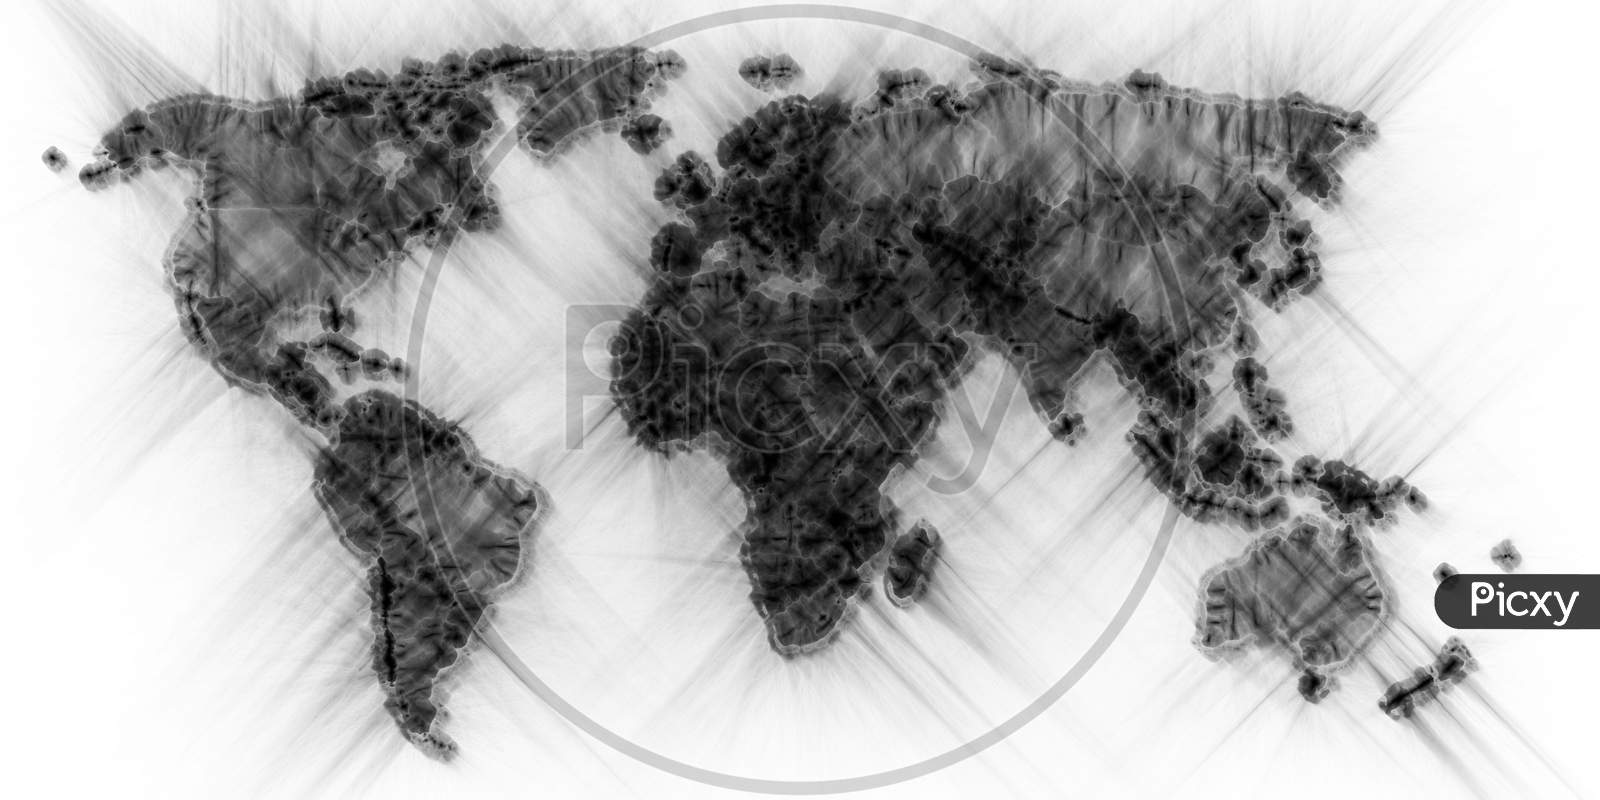 Stunning view of the world map using kirlian energy photography